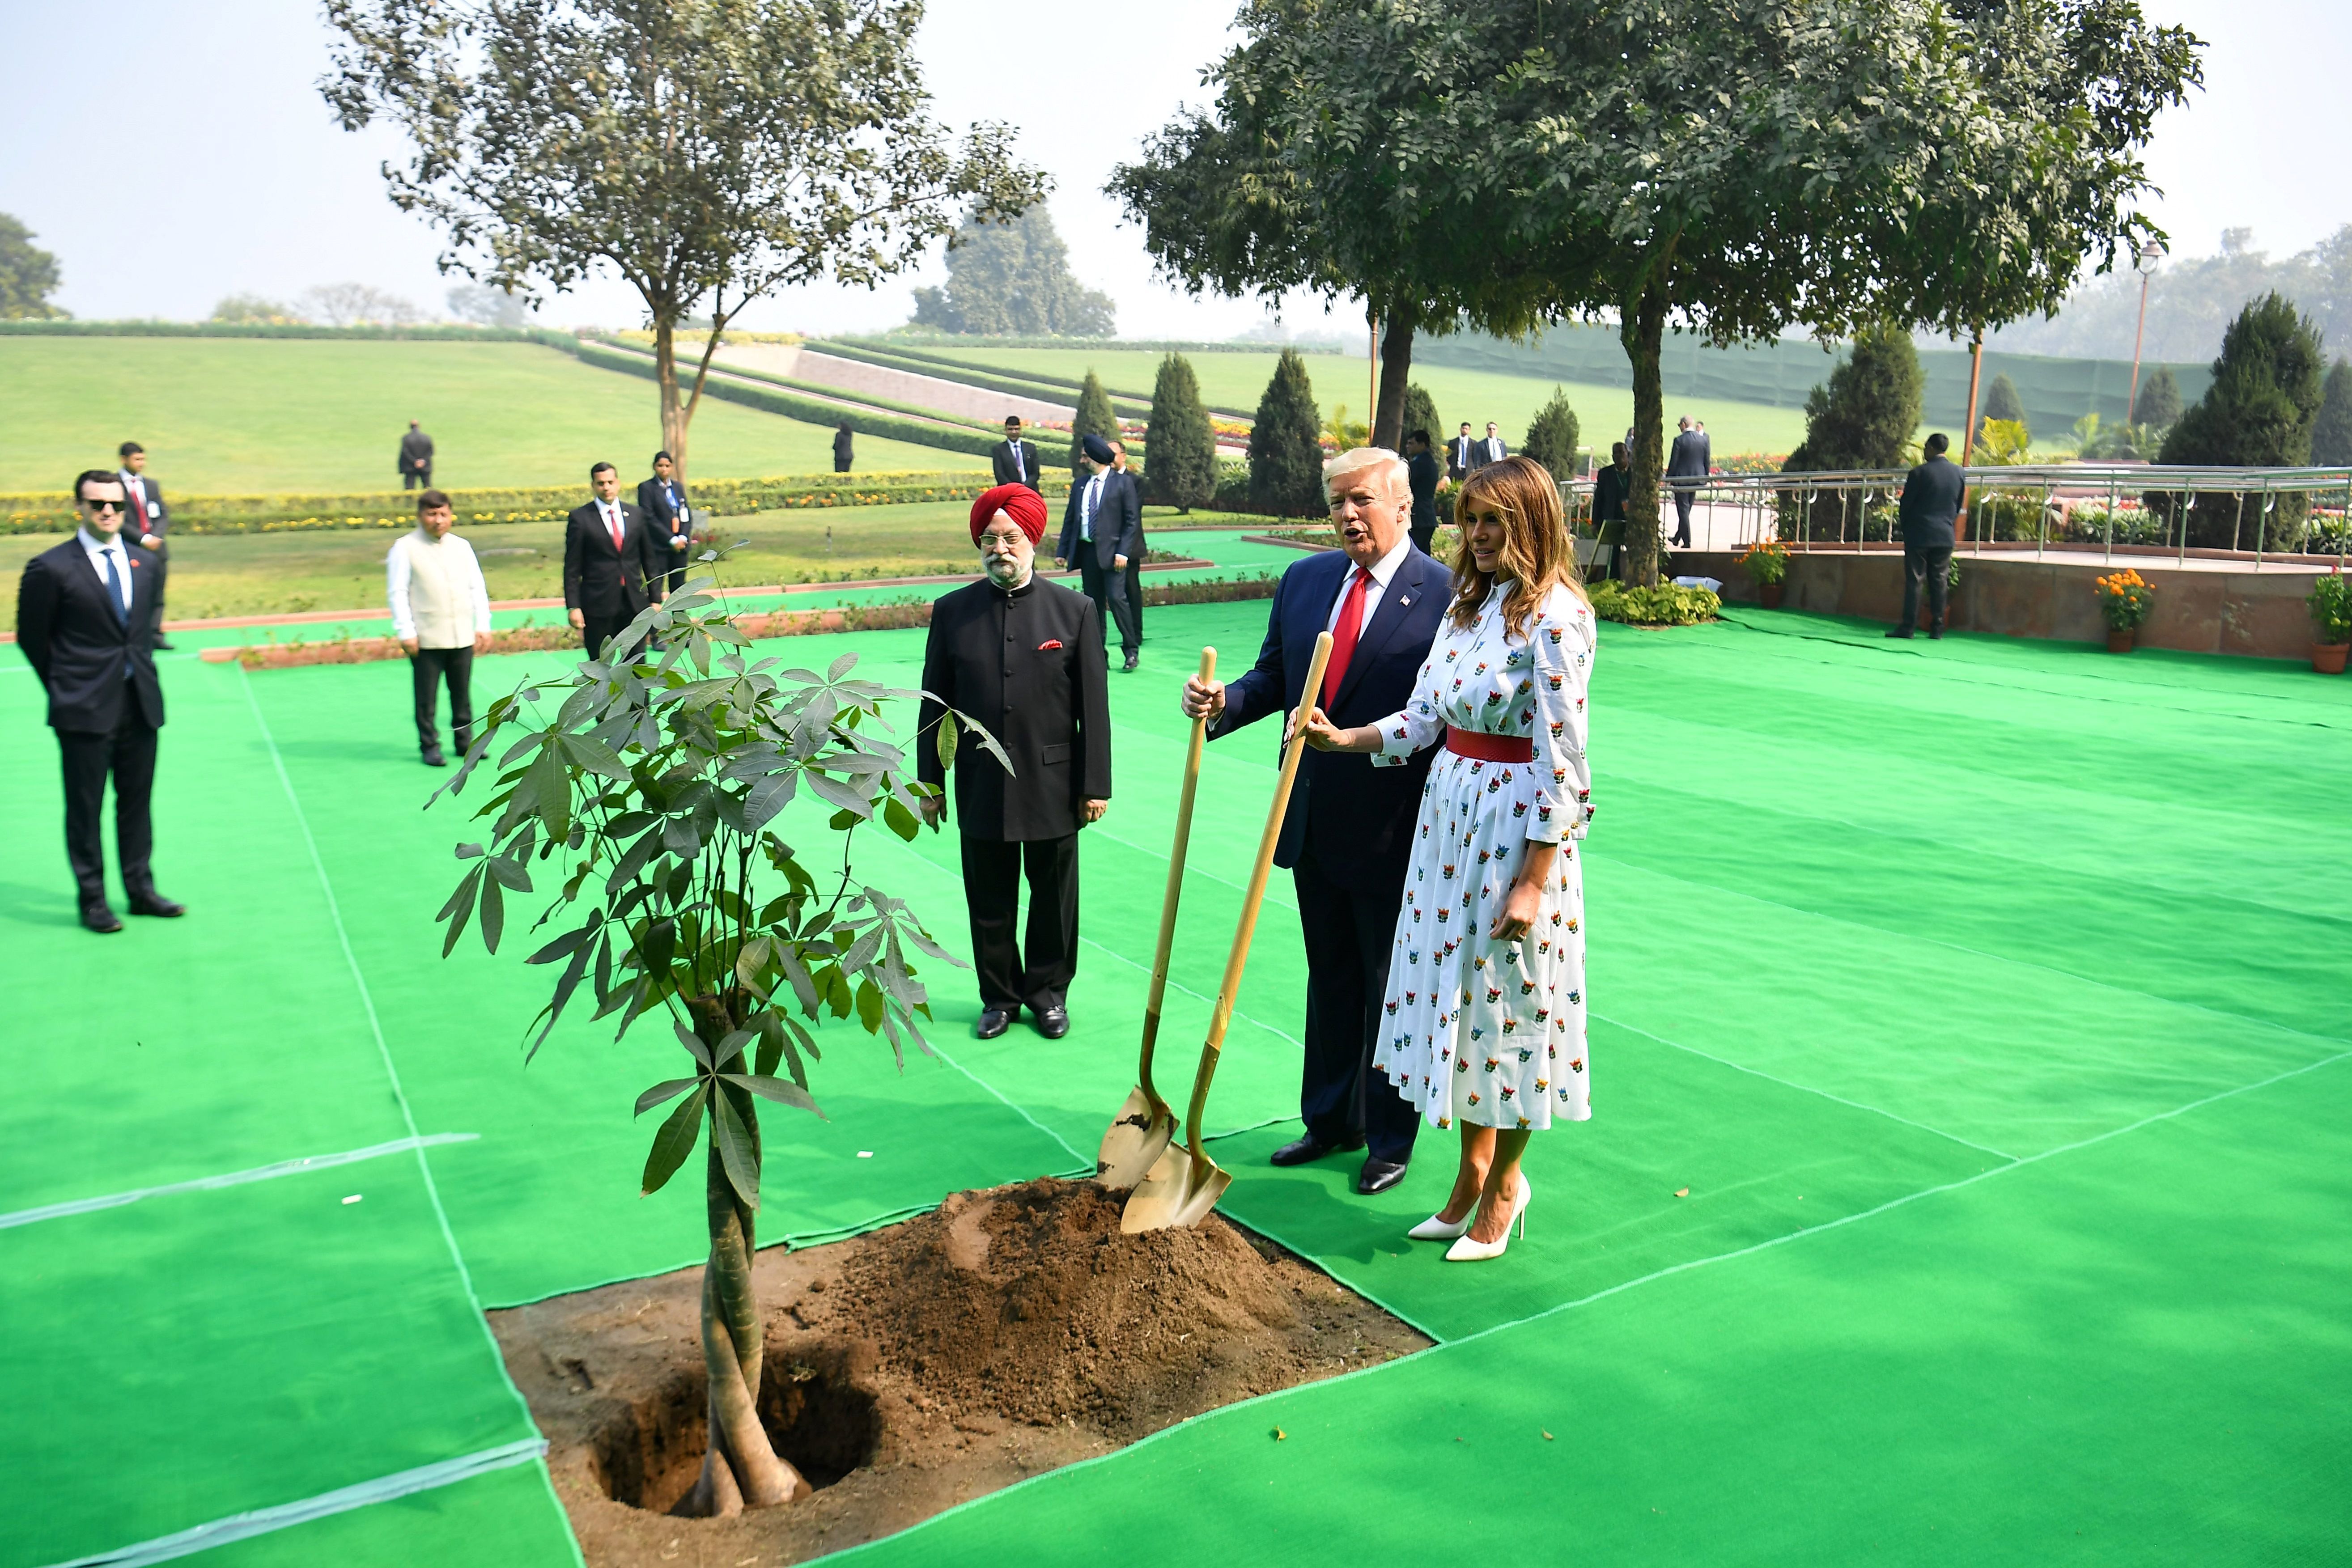  US President Donald Trump and First Lady Melania Trump plant a tree as they pay tribute at Raj Ghat, the memorial for Indian independence icon Mahatma Gandhi, in New Delhi on February 25